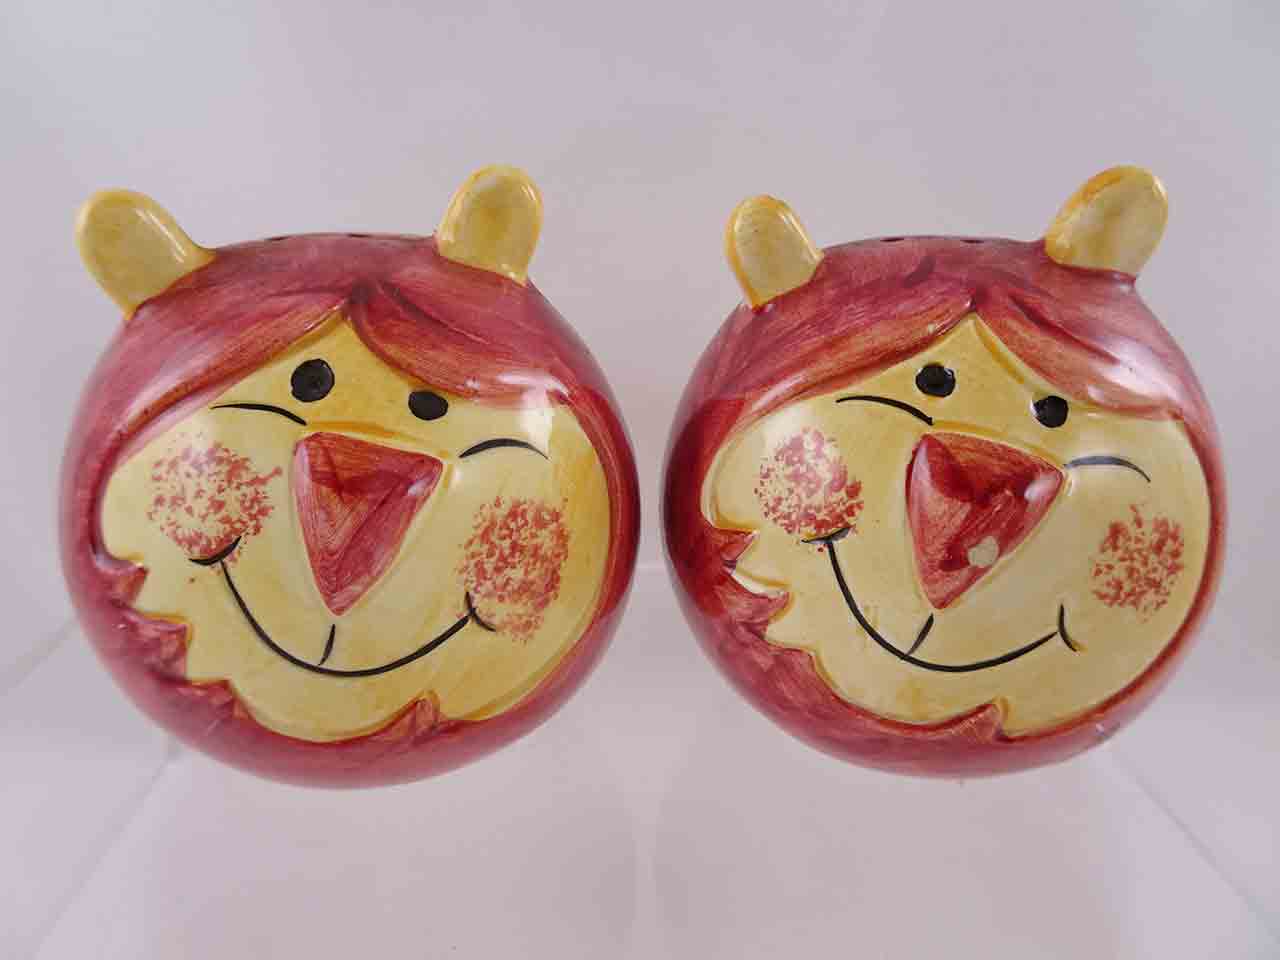 Japan big round animal heads salt and pepper shakers - lions